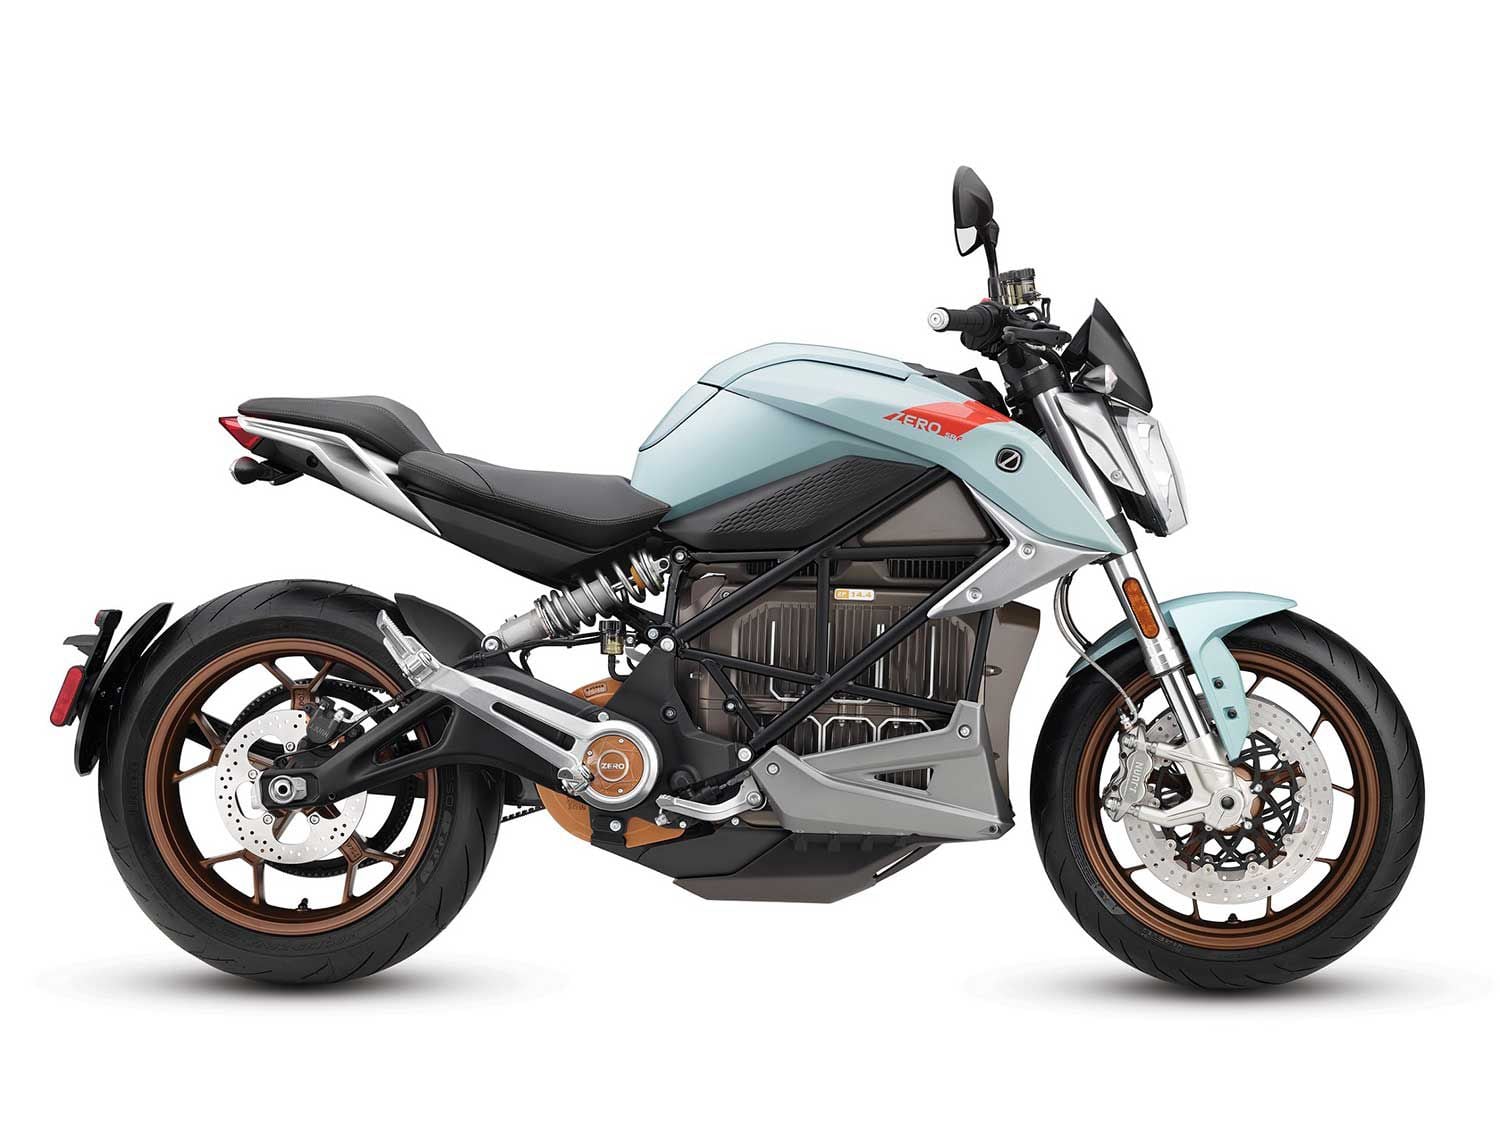 The SR/F signals a sea change for convenience and range in the electric motorcycle market, but pricing may still be a drag initially.